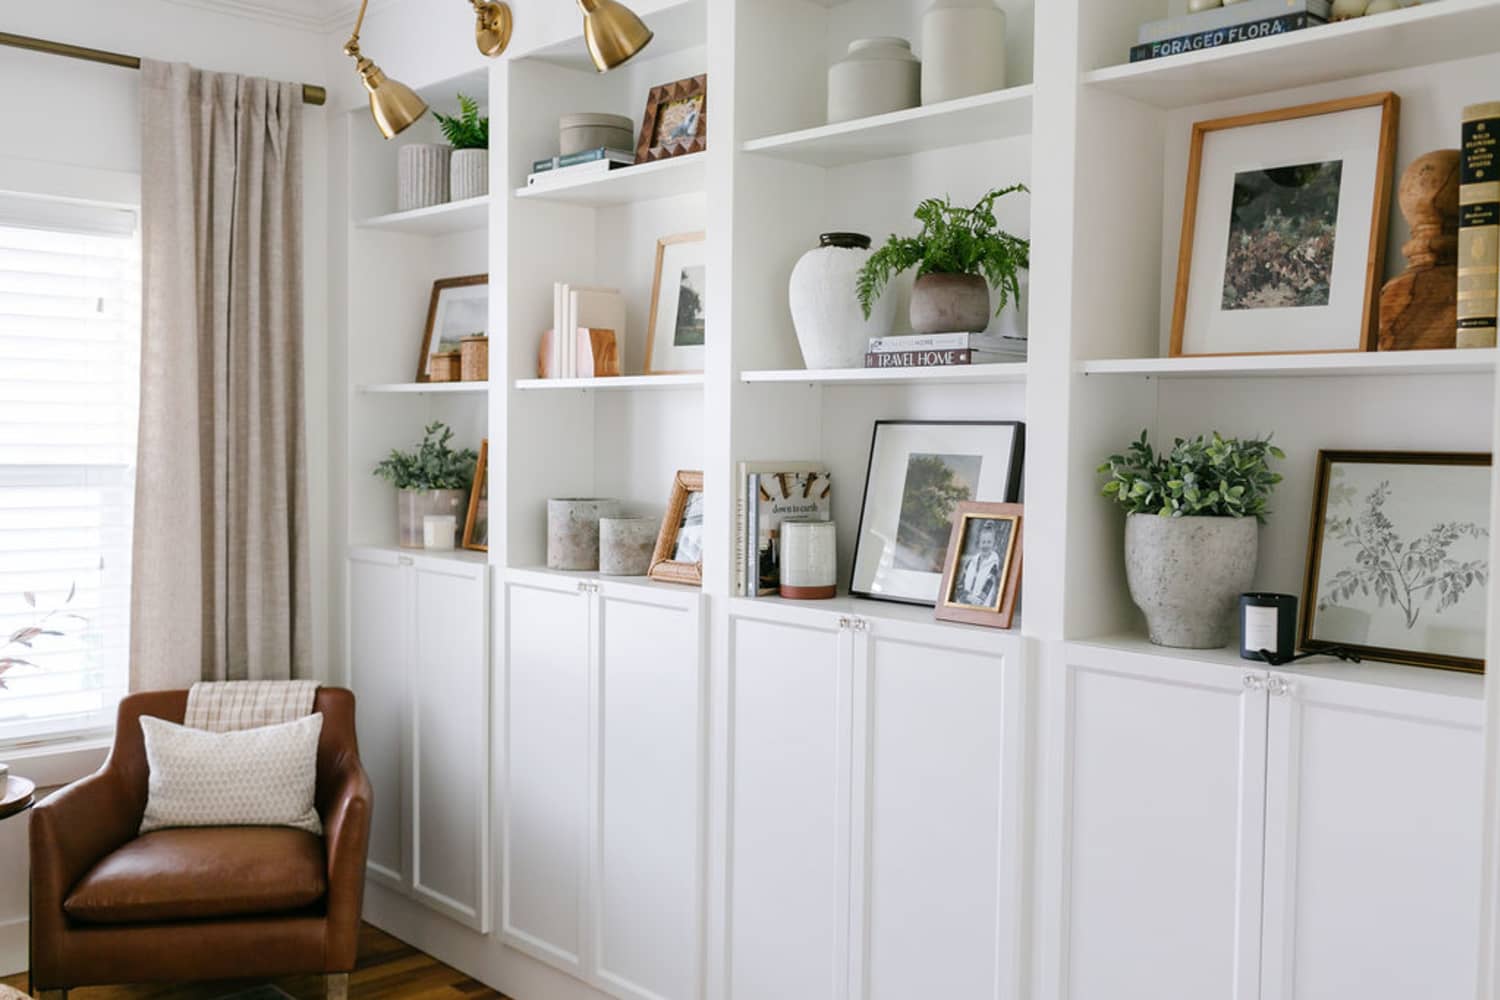 You Won’t Even Recognize IKEA in These 10 High-End Hacks